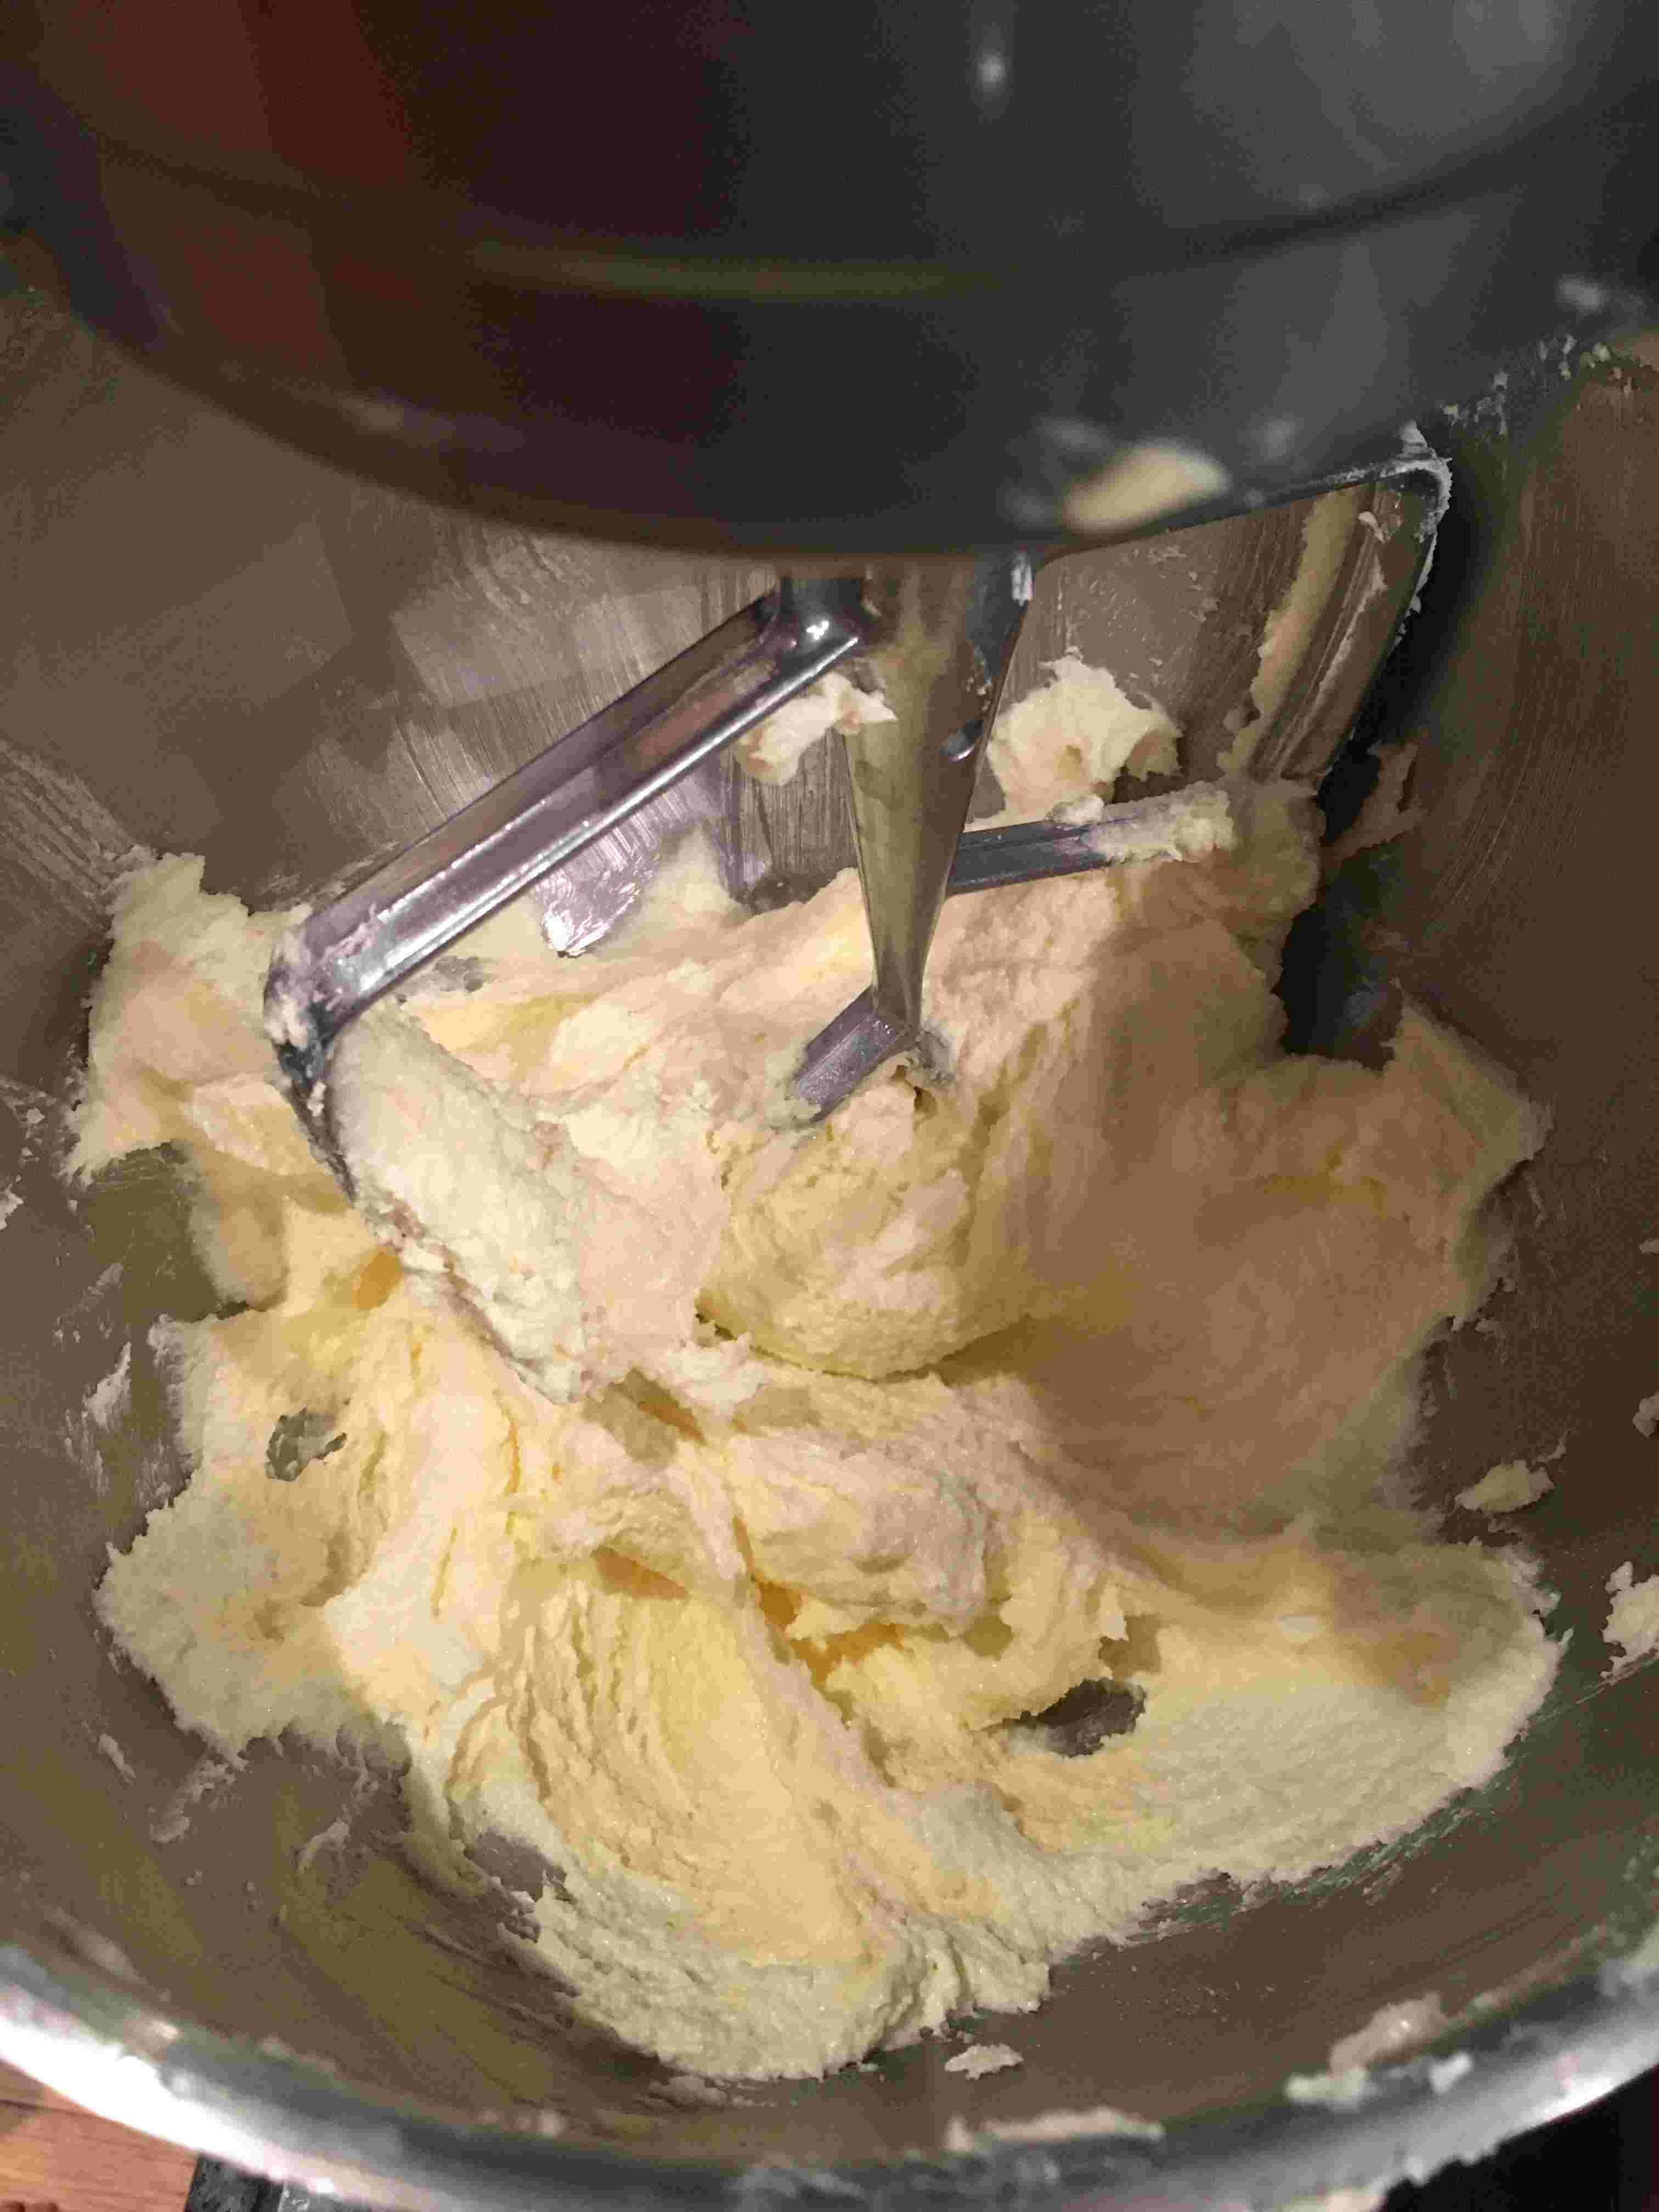 Butter and sugar mixture - should be fluffy and a pale yellow